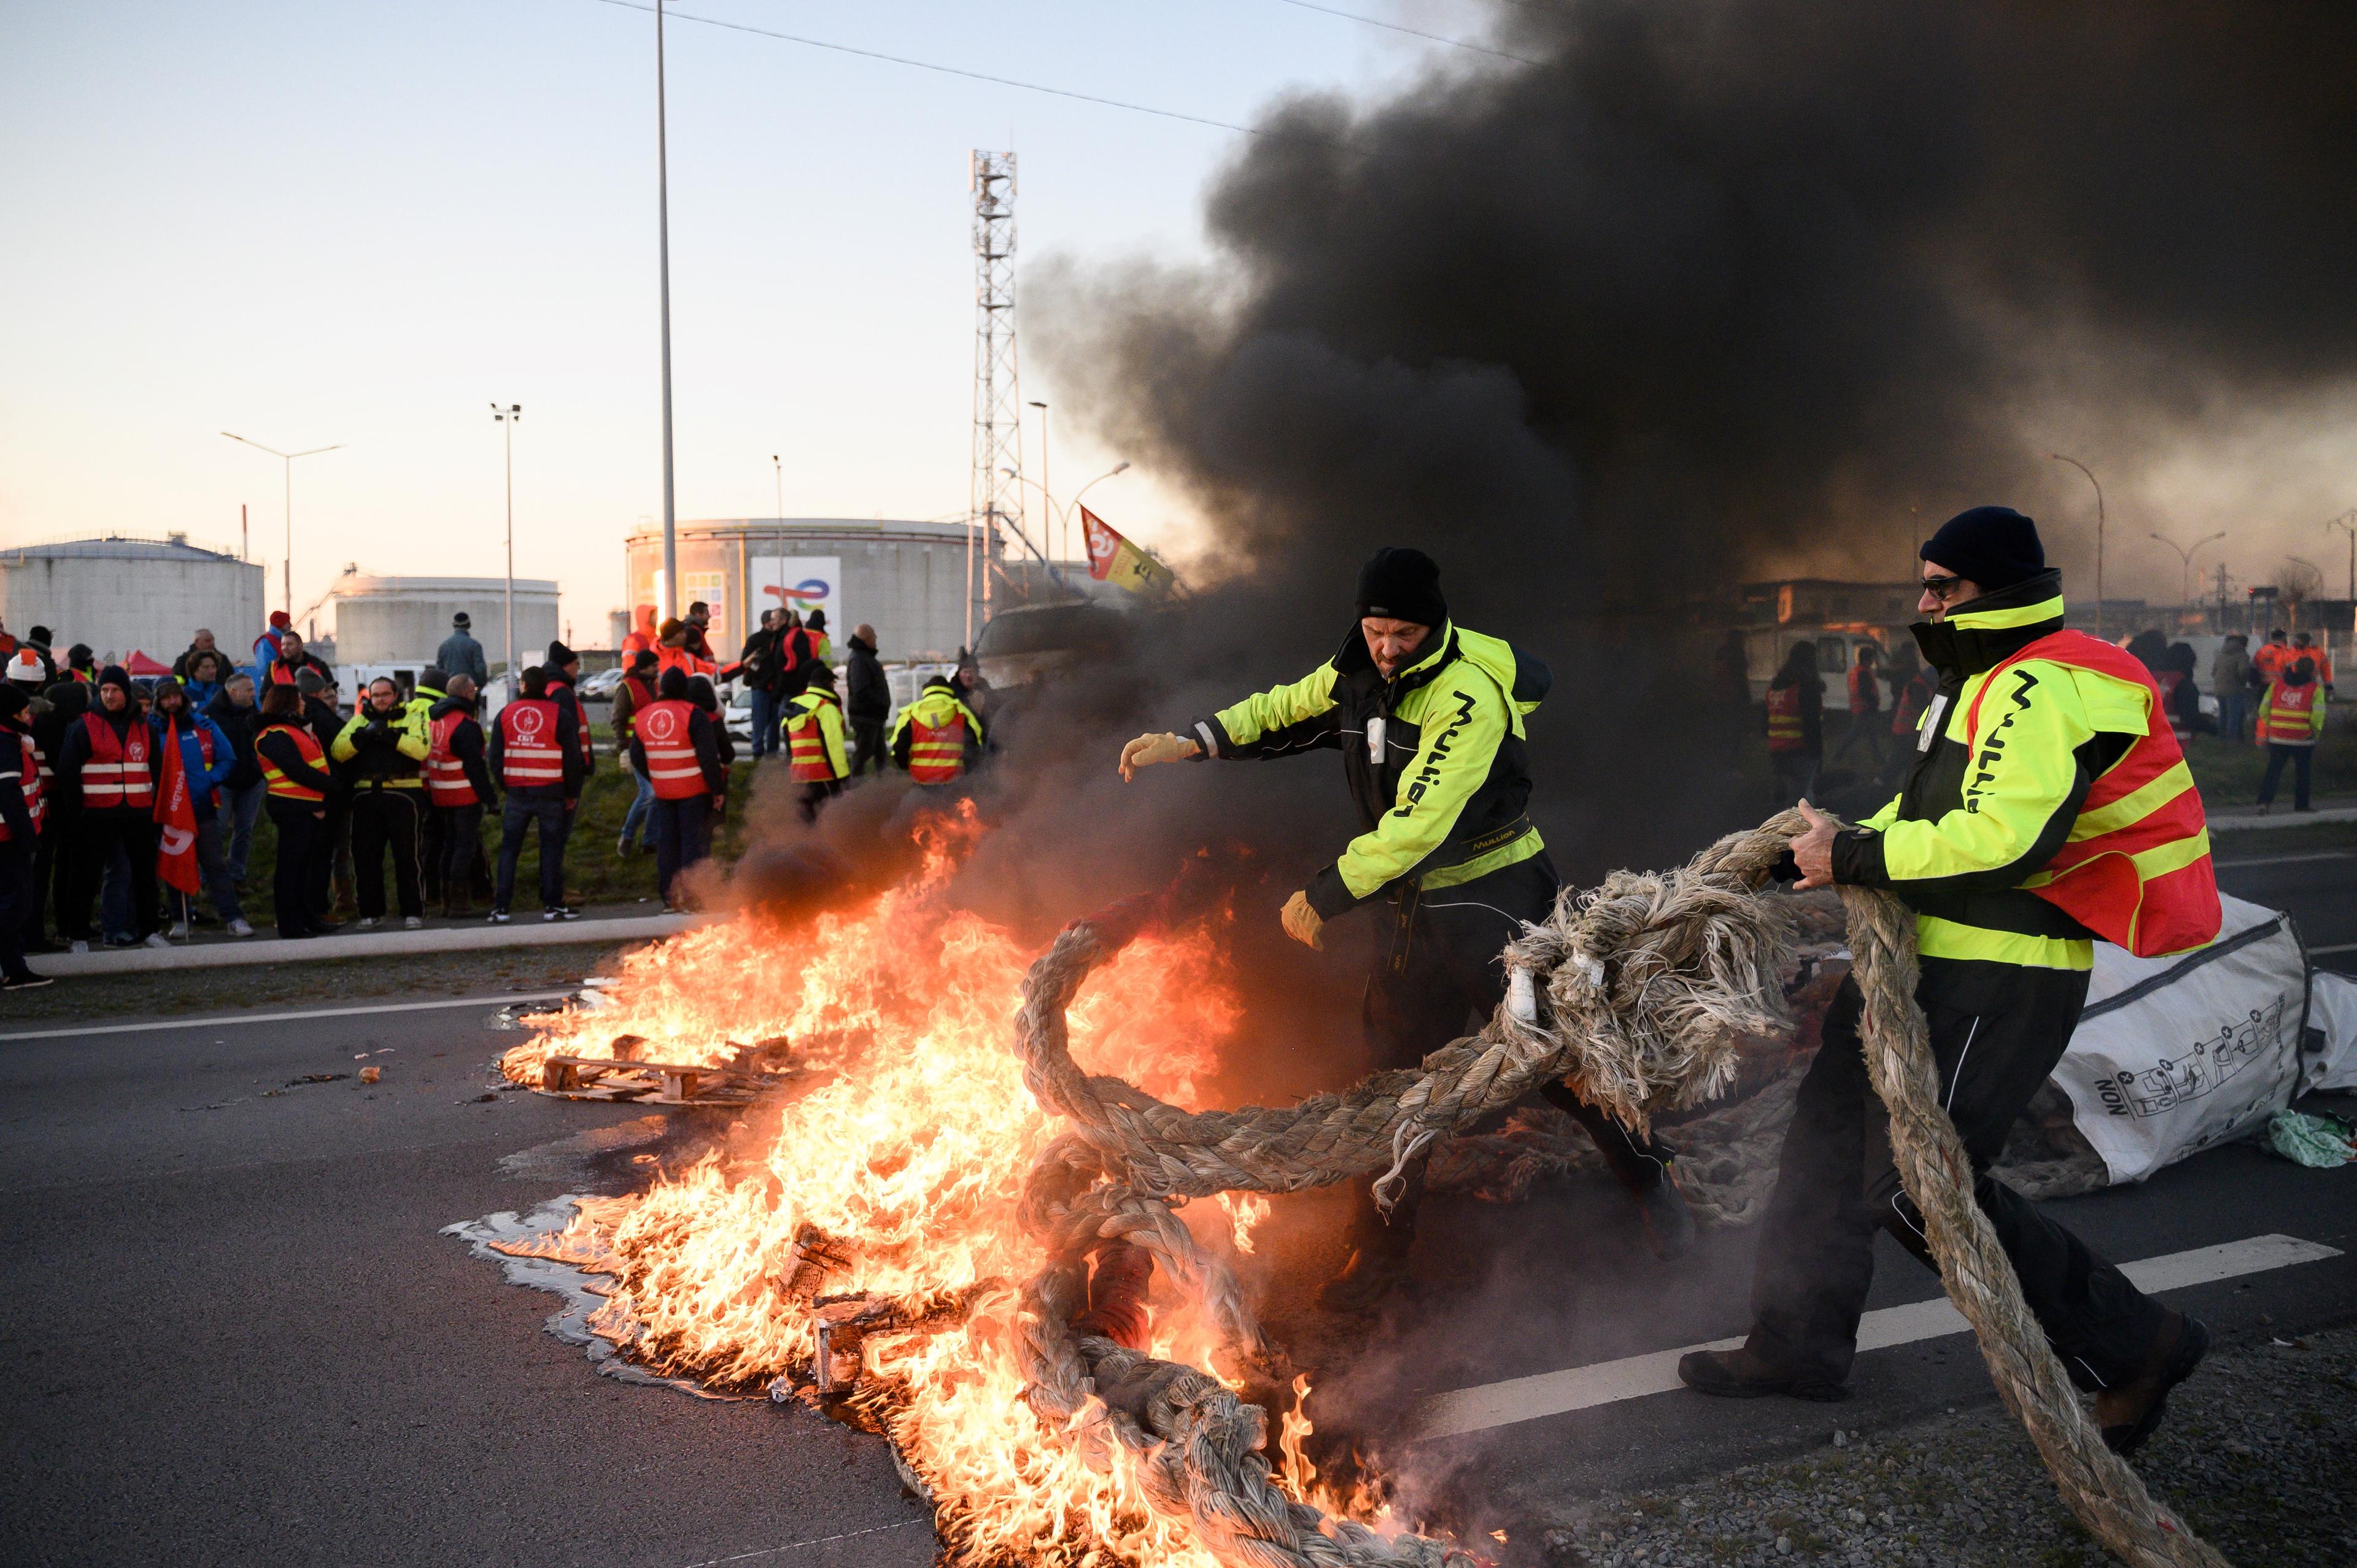 Dozens of unionists set a fire to block a road in front of the Total Energies refinery during an action called by the French union General Confederation of Labour (CGT) against a deeply unpopular pensions overhaul in Donges, Western France on February 8, 2023. - France braced on February 7, 2023 for new strikes and mass demonstrations against French President's proposal to reform French pensions, including hiking the retirement age from 62 to 64 and increasing the number of years people must make contributions for a full pension. (Photo by LOIC VENANCE / AFP)